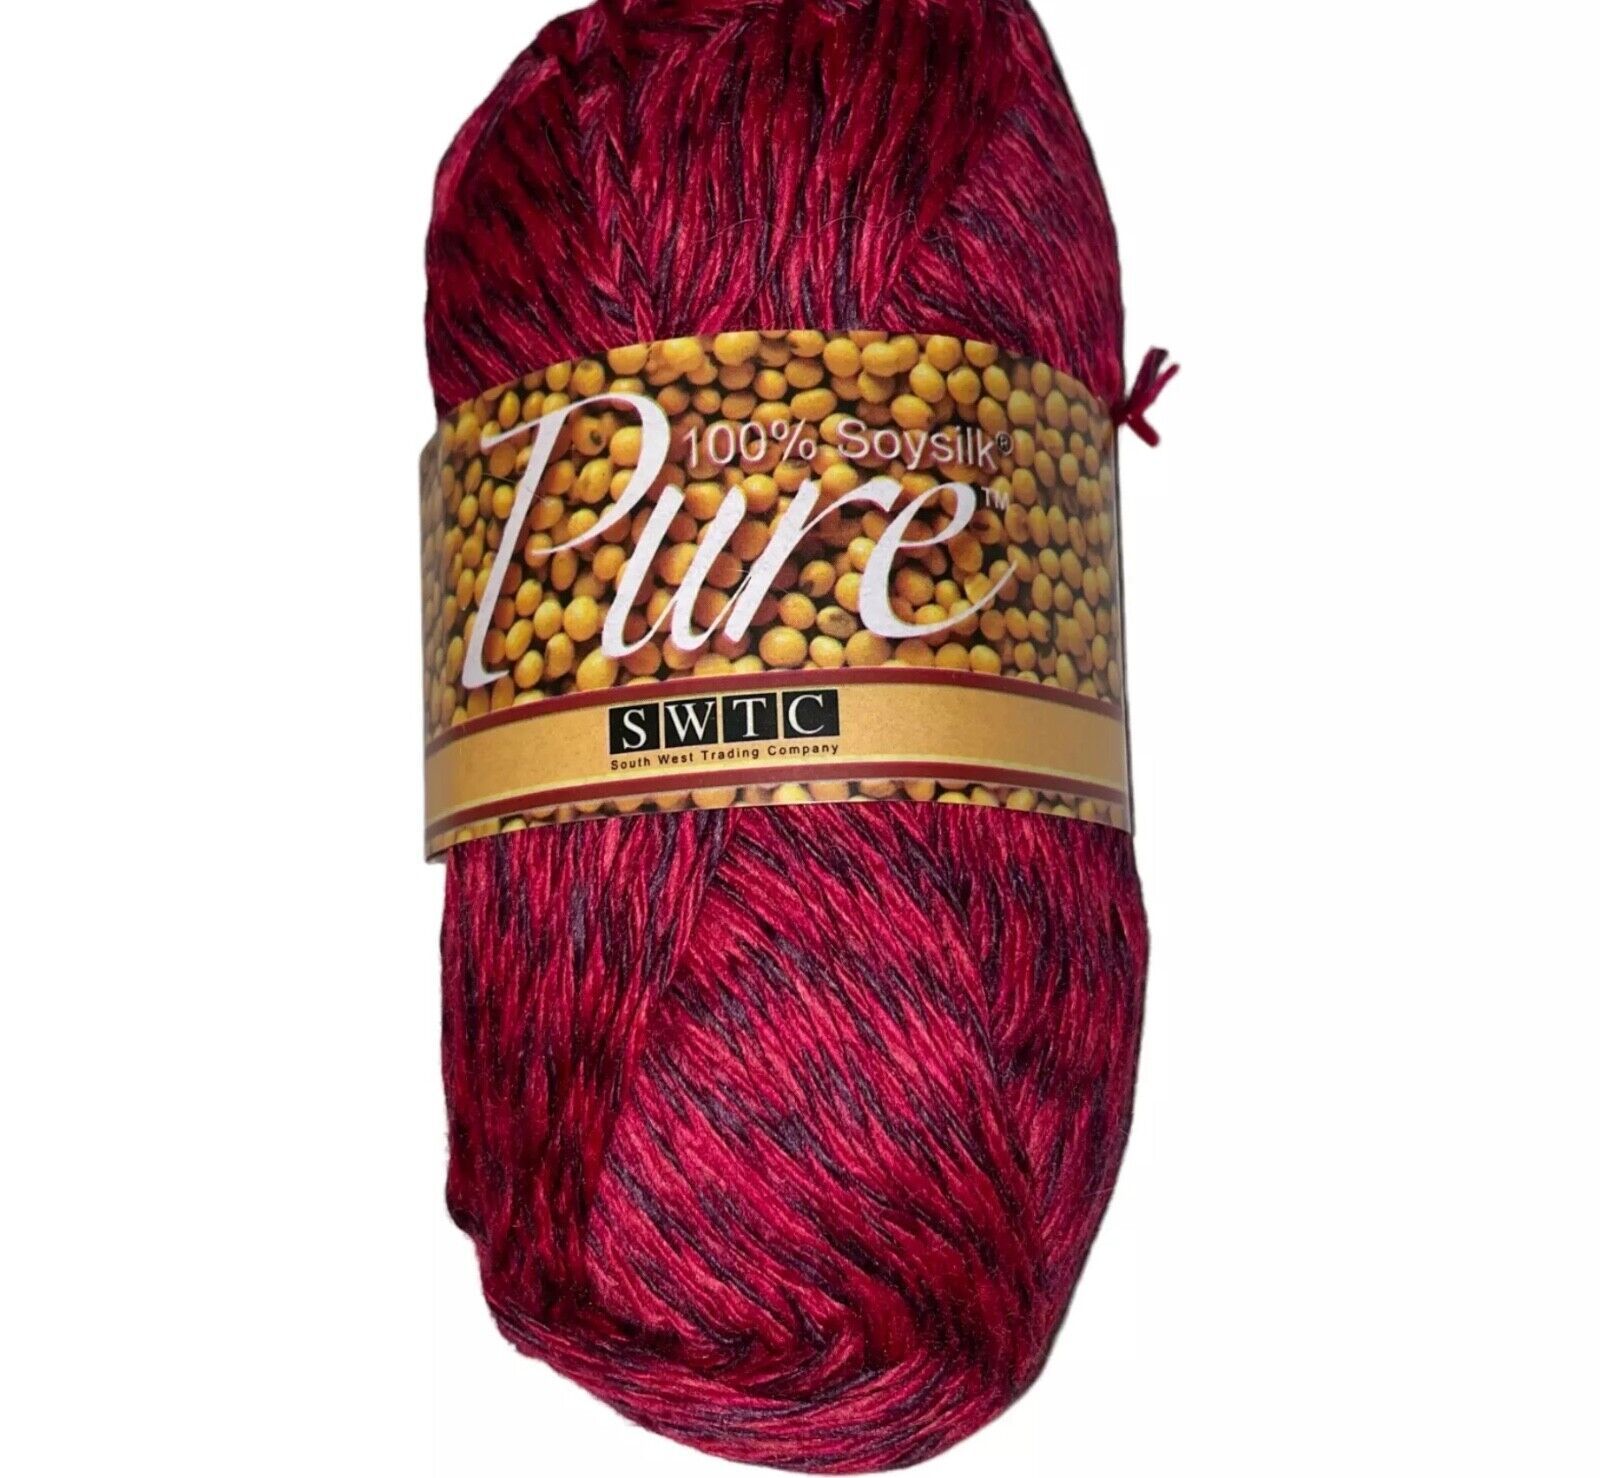 Primary image for South West Trading Company PURE Soy Silk Worsted Yarn SWTC #21 Red Soysilk